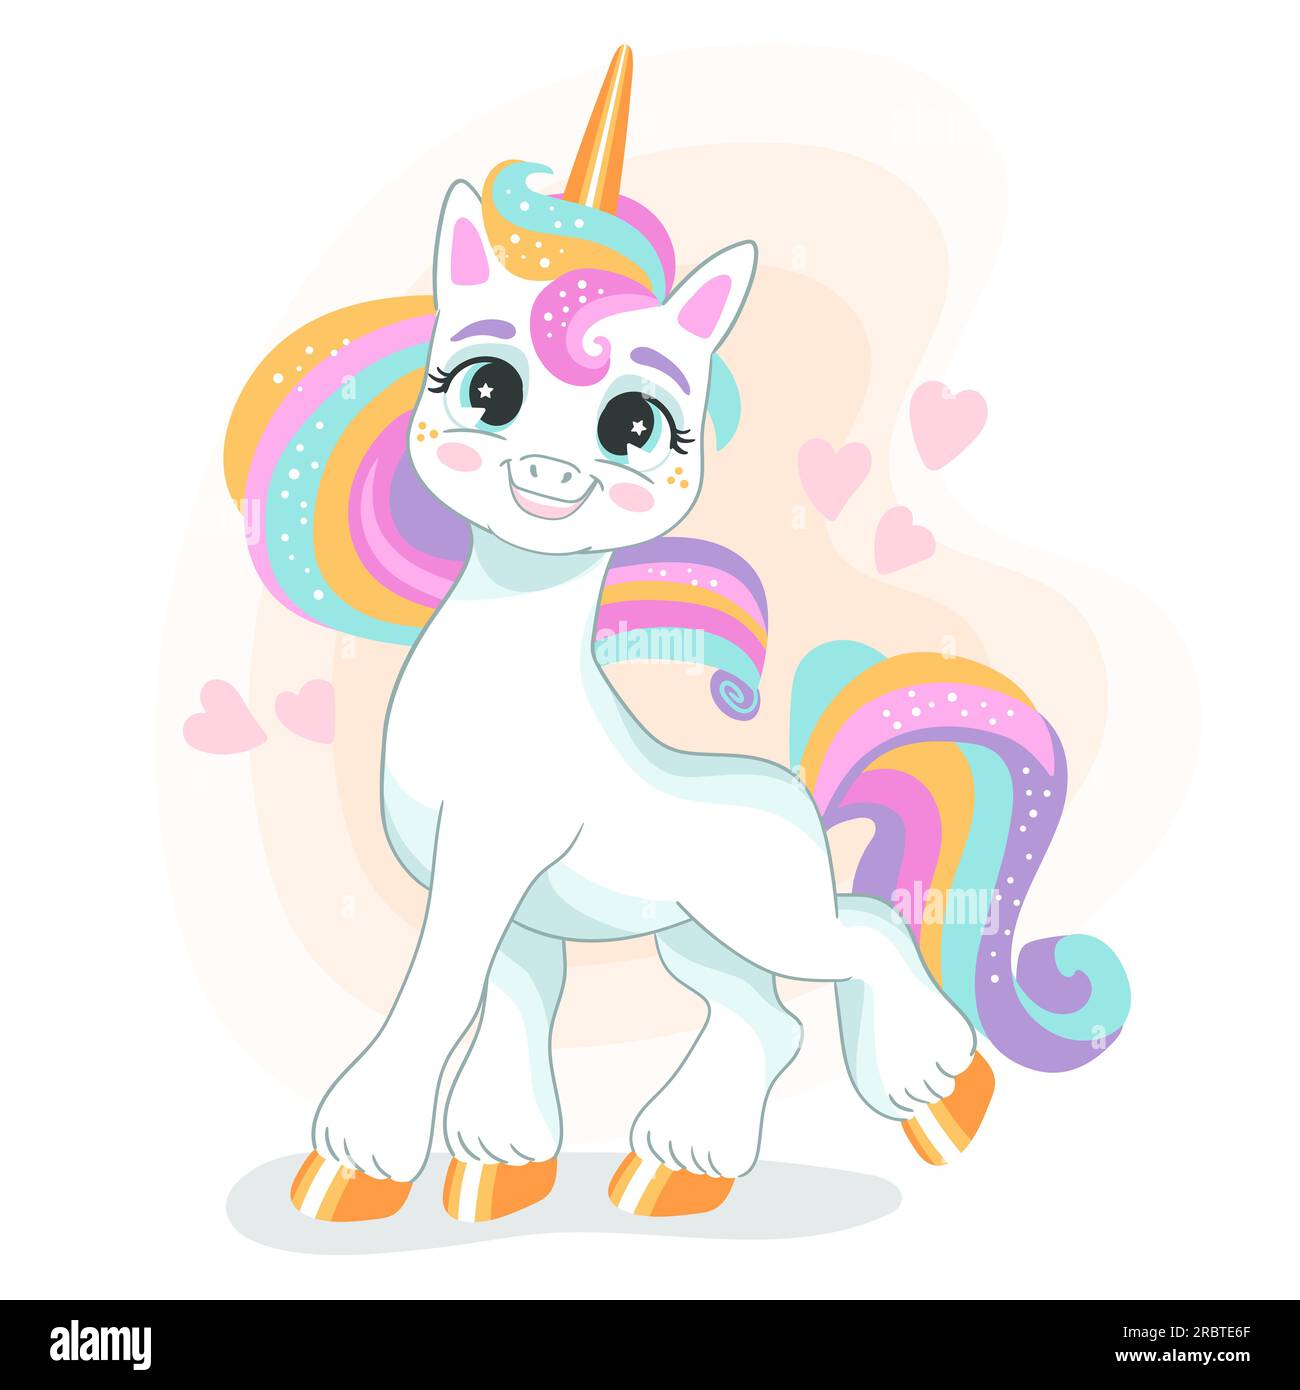 Cute cartoon character close up unicorn with a rainbow mane on a white background. Vector isolated illustration. For print, design, poster, sticker, c Stock Vector